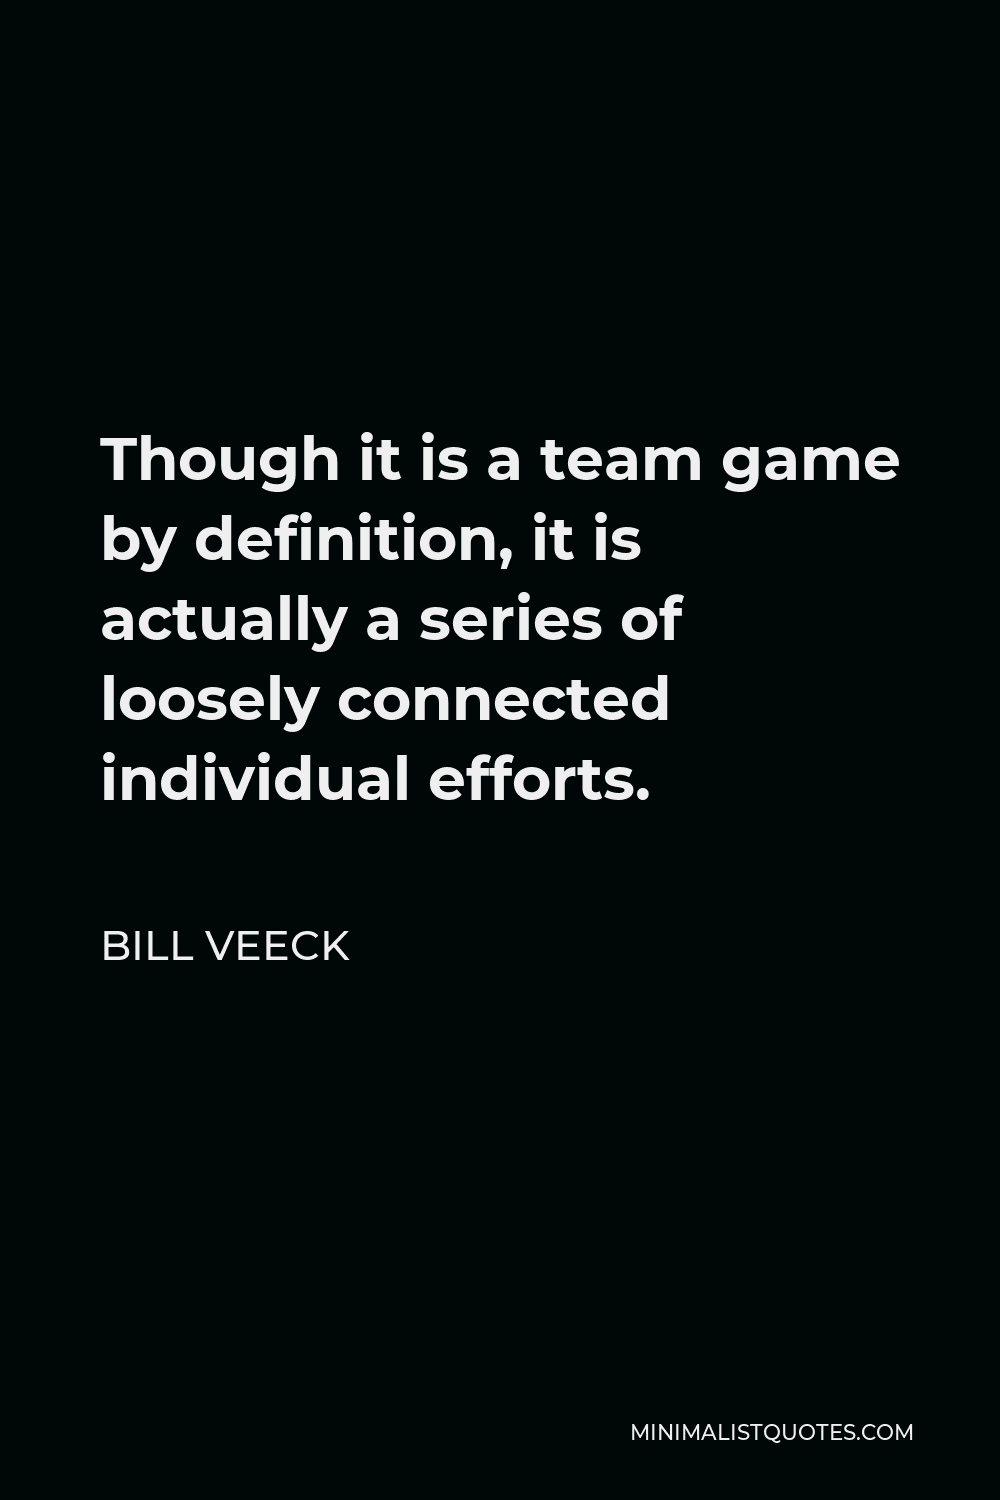 Bill Veeck Quote - Though it is a team game by definition, it is actually a series of loosely connected individual efforts.